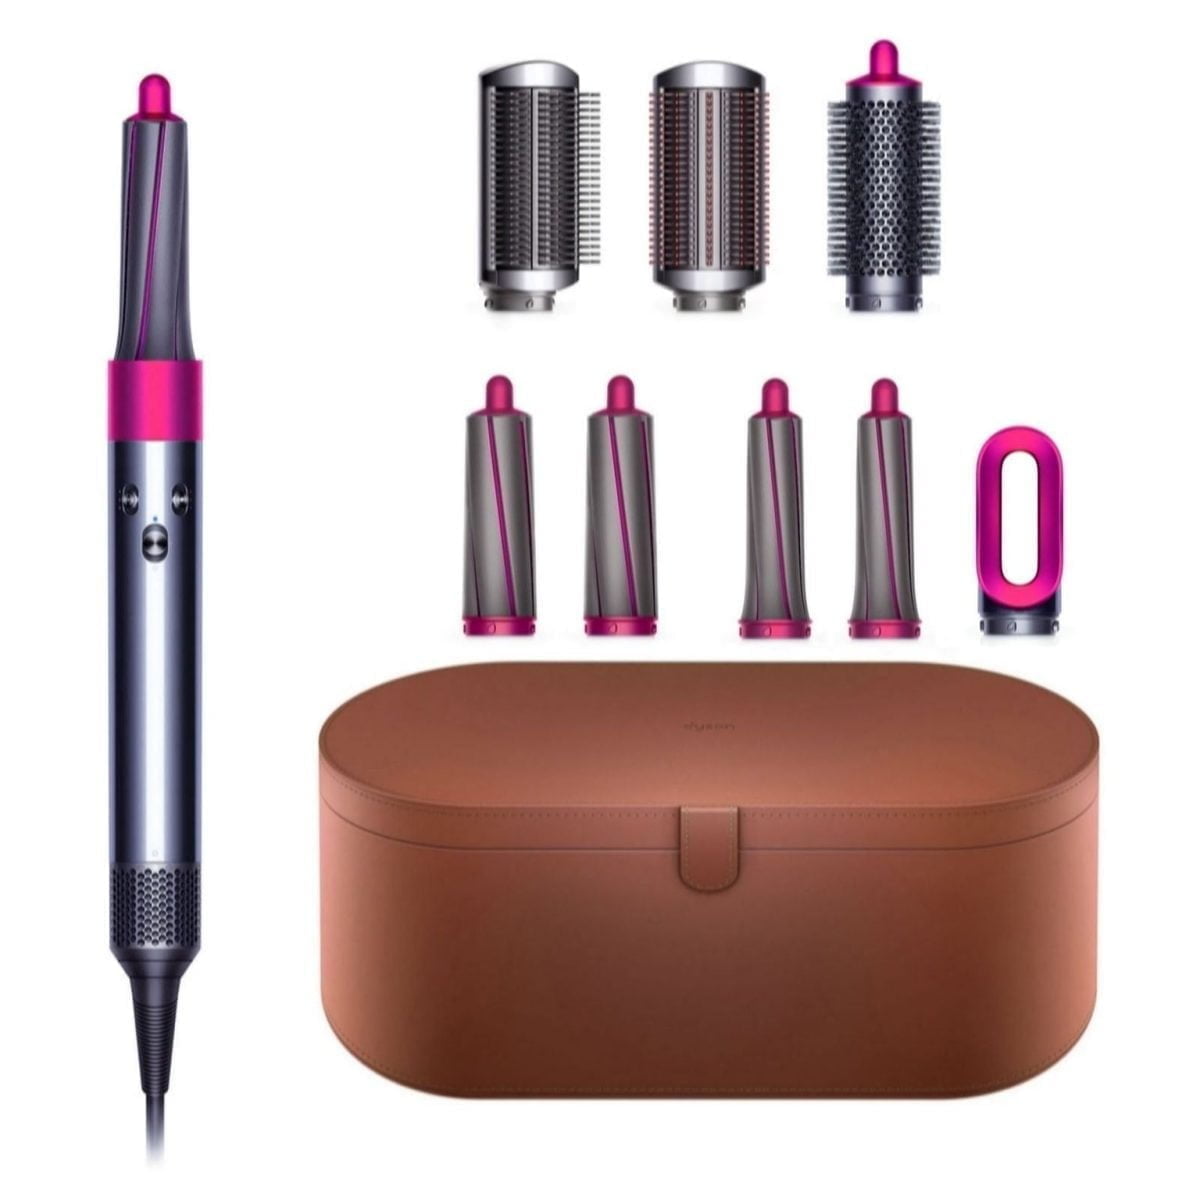 3614700 Dyson &Amp;Lt;P Class=&Amp;Quot;Typography-Body Product-Hero__Line2&Amp;Quot;&Amp;Gt;Includes 6 Dyson Airwrap™ Styler Attachments For Multiple Hair Types.&Amp;Lt;/P&Amp;Gt; Https://Youtu.be/Ku8Cenhcdi0 Dyson Dyson Airwrap Complete